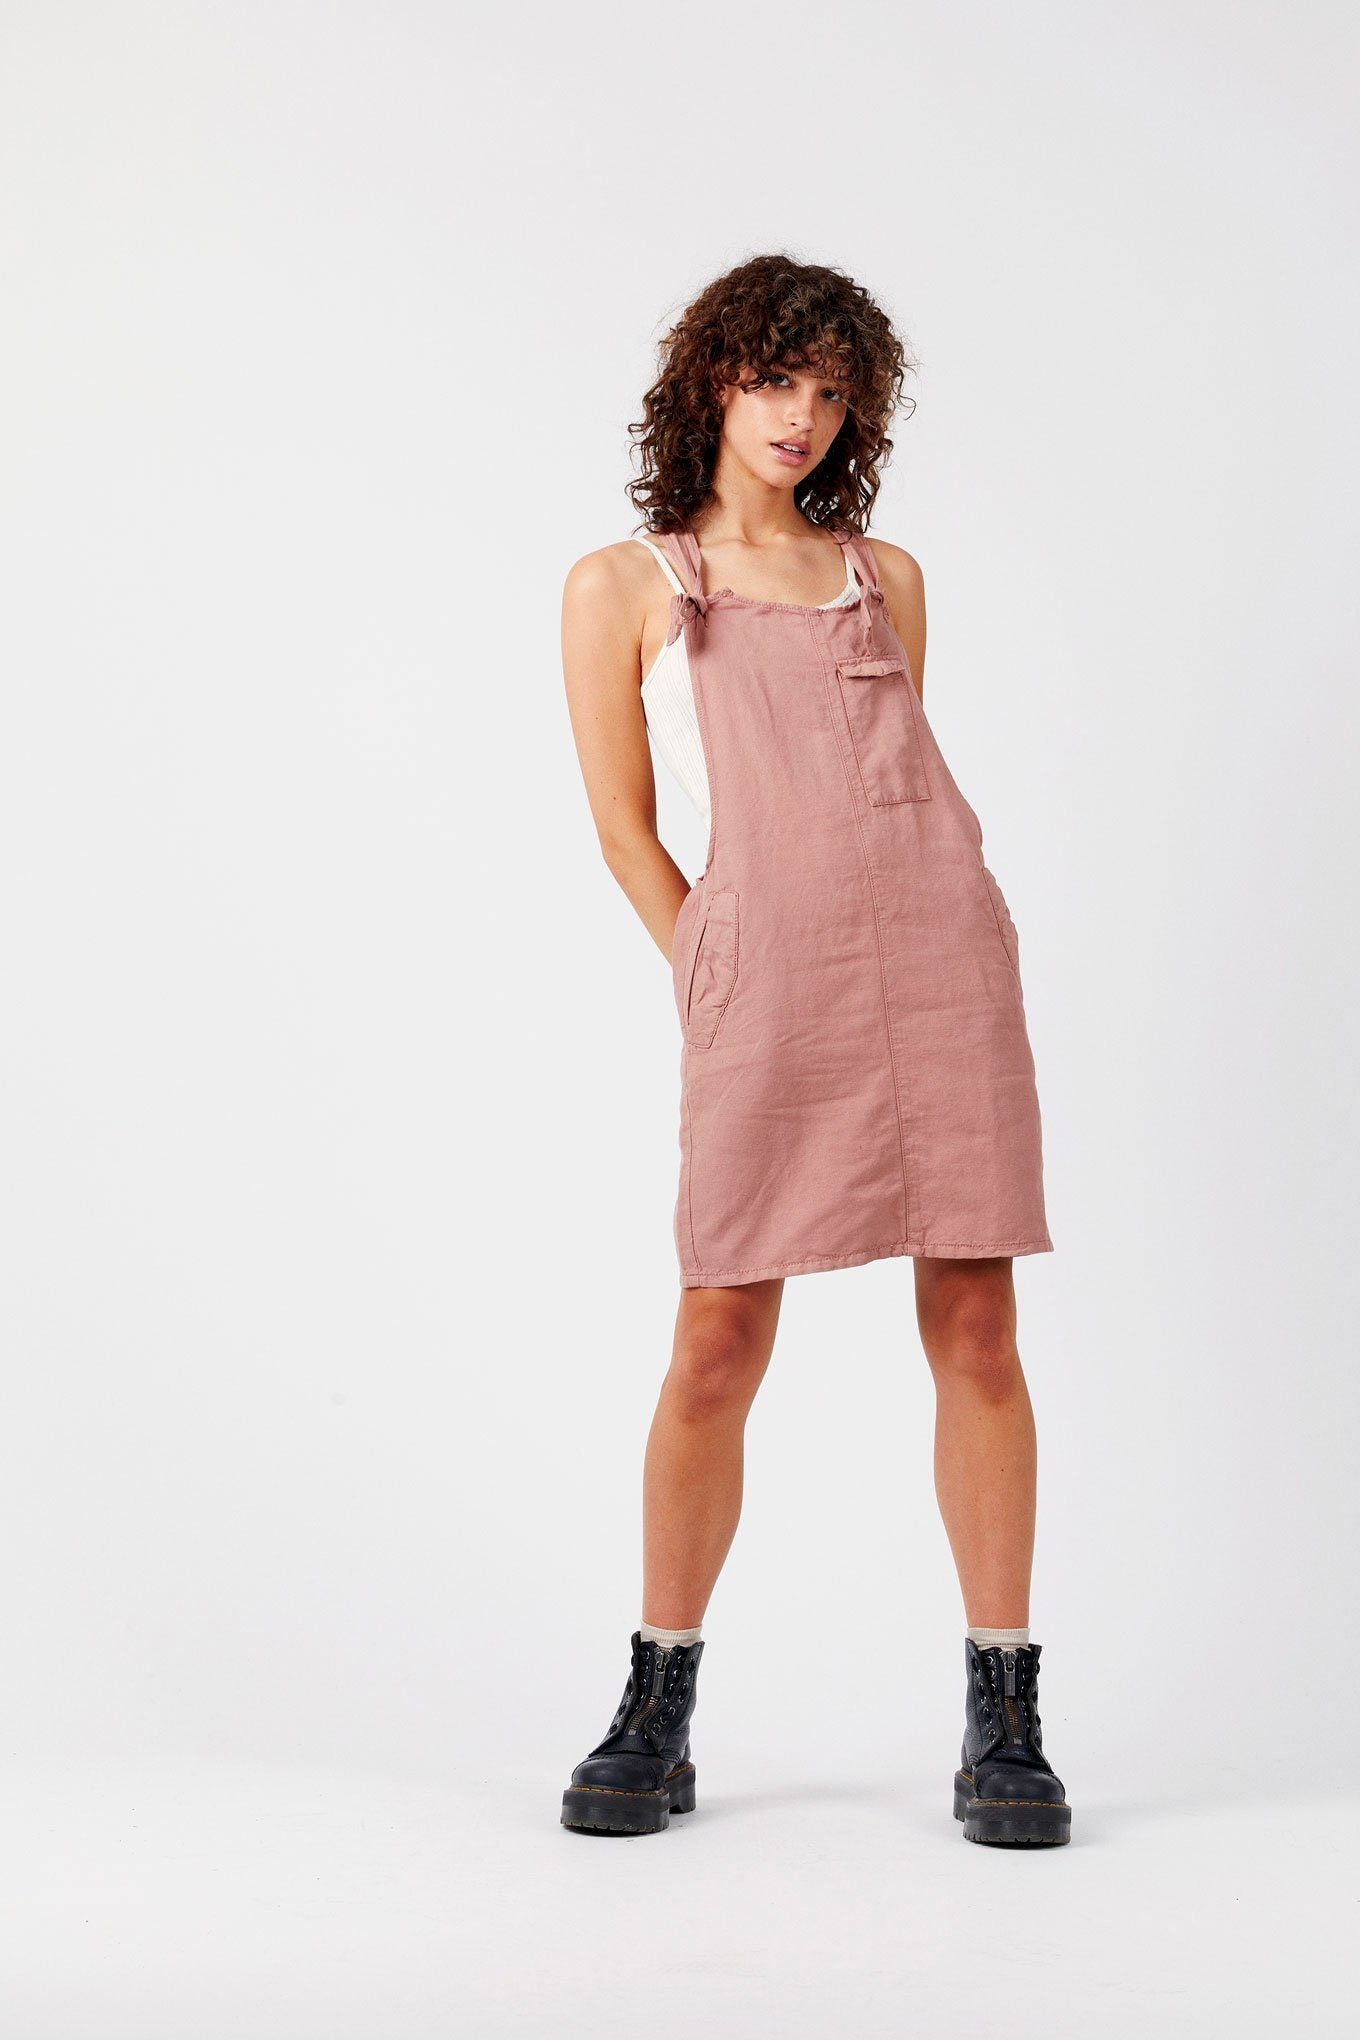 PEGGY Pink - GOTS Organic Cotton Dress by Flax & Loom, SIZE 1 / UK 8 / EUR 36